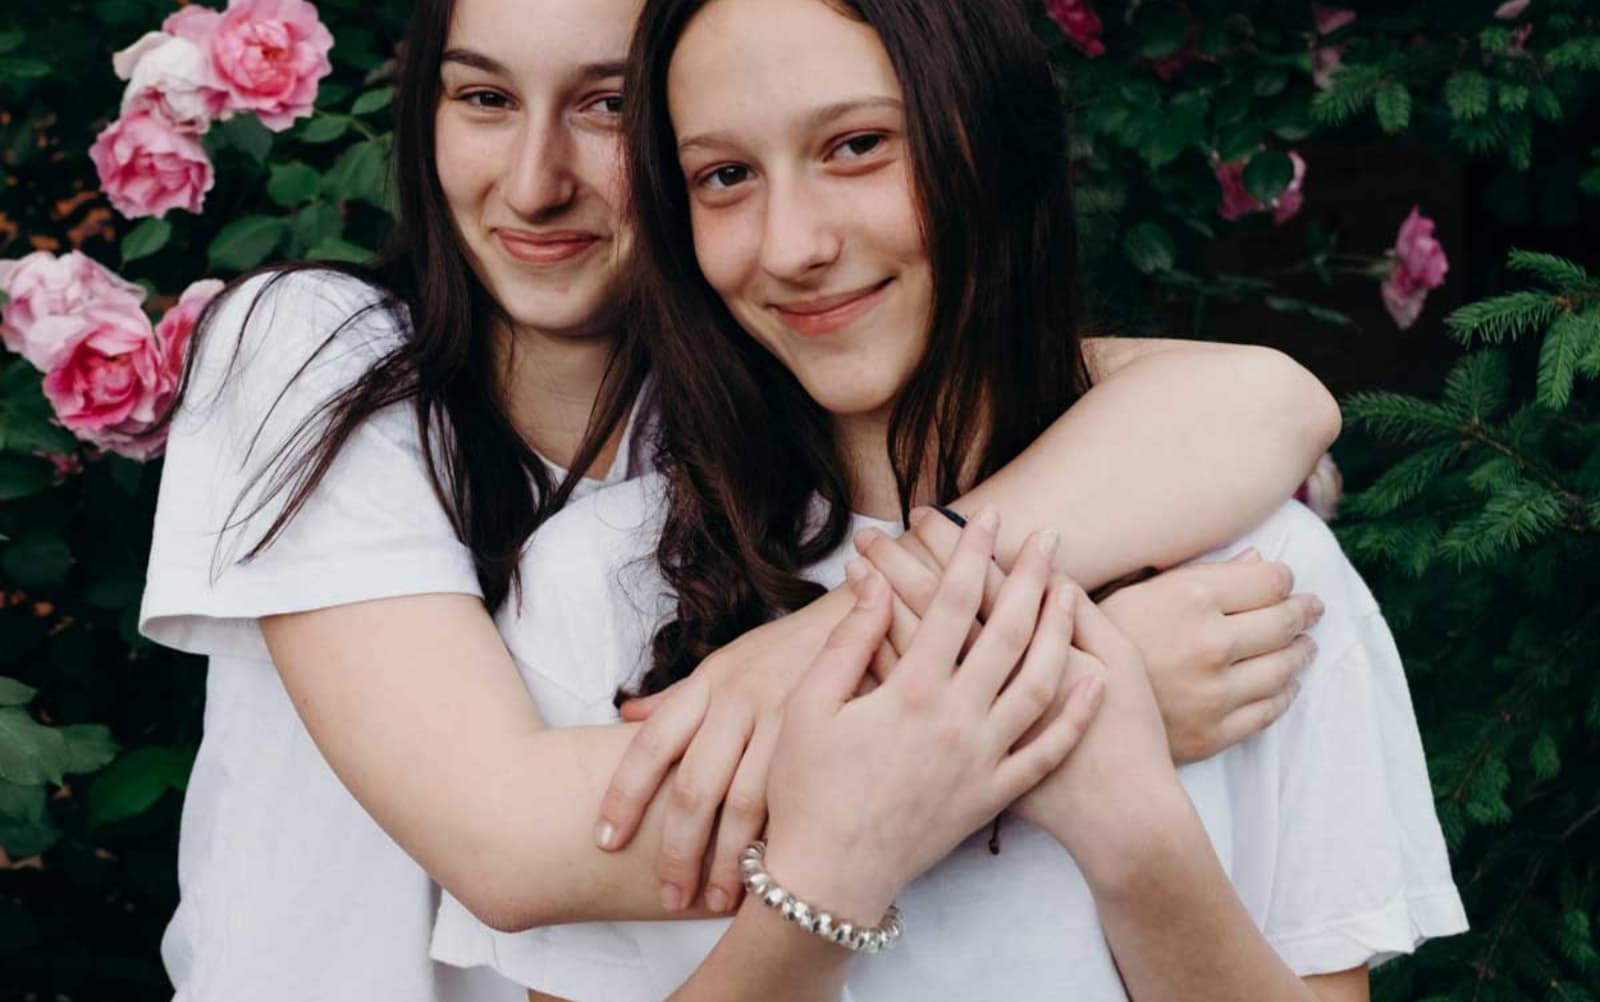 Two young women hugging each other in support